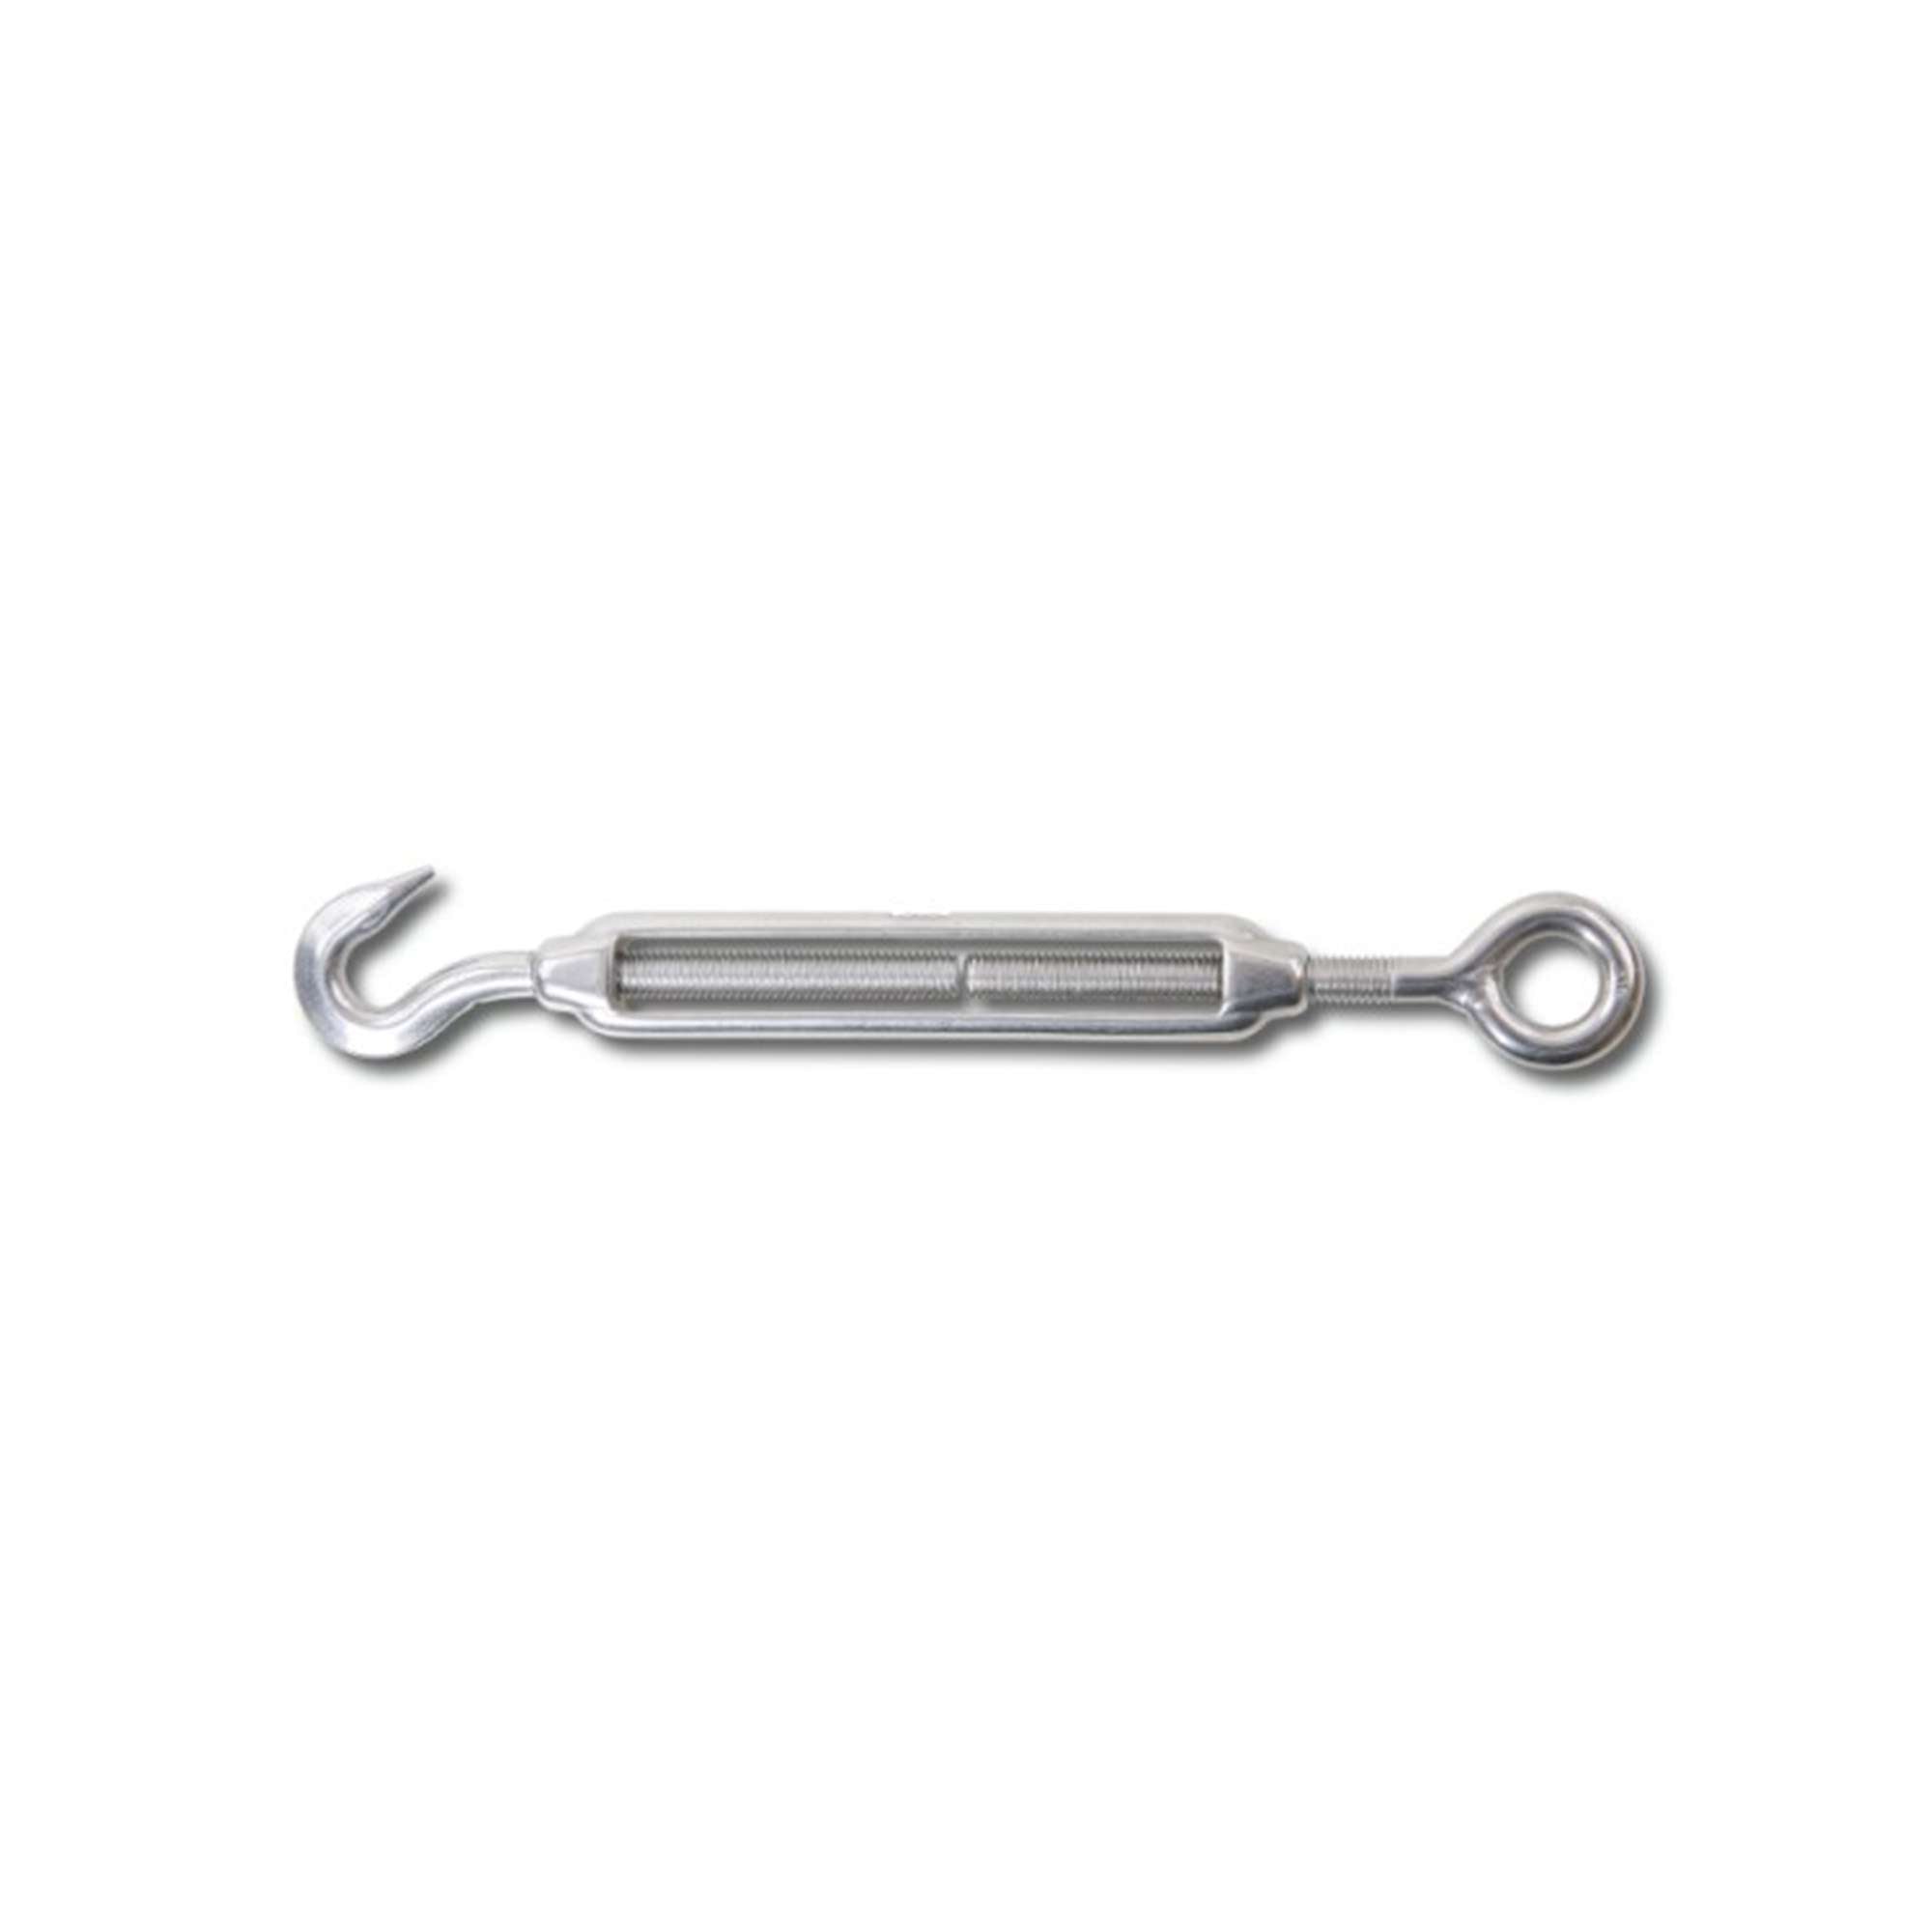 AISI 316 stainless steel eye and hook tensioner - Beta 8206